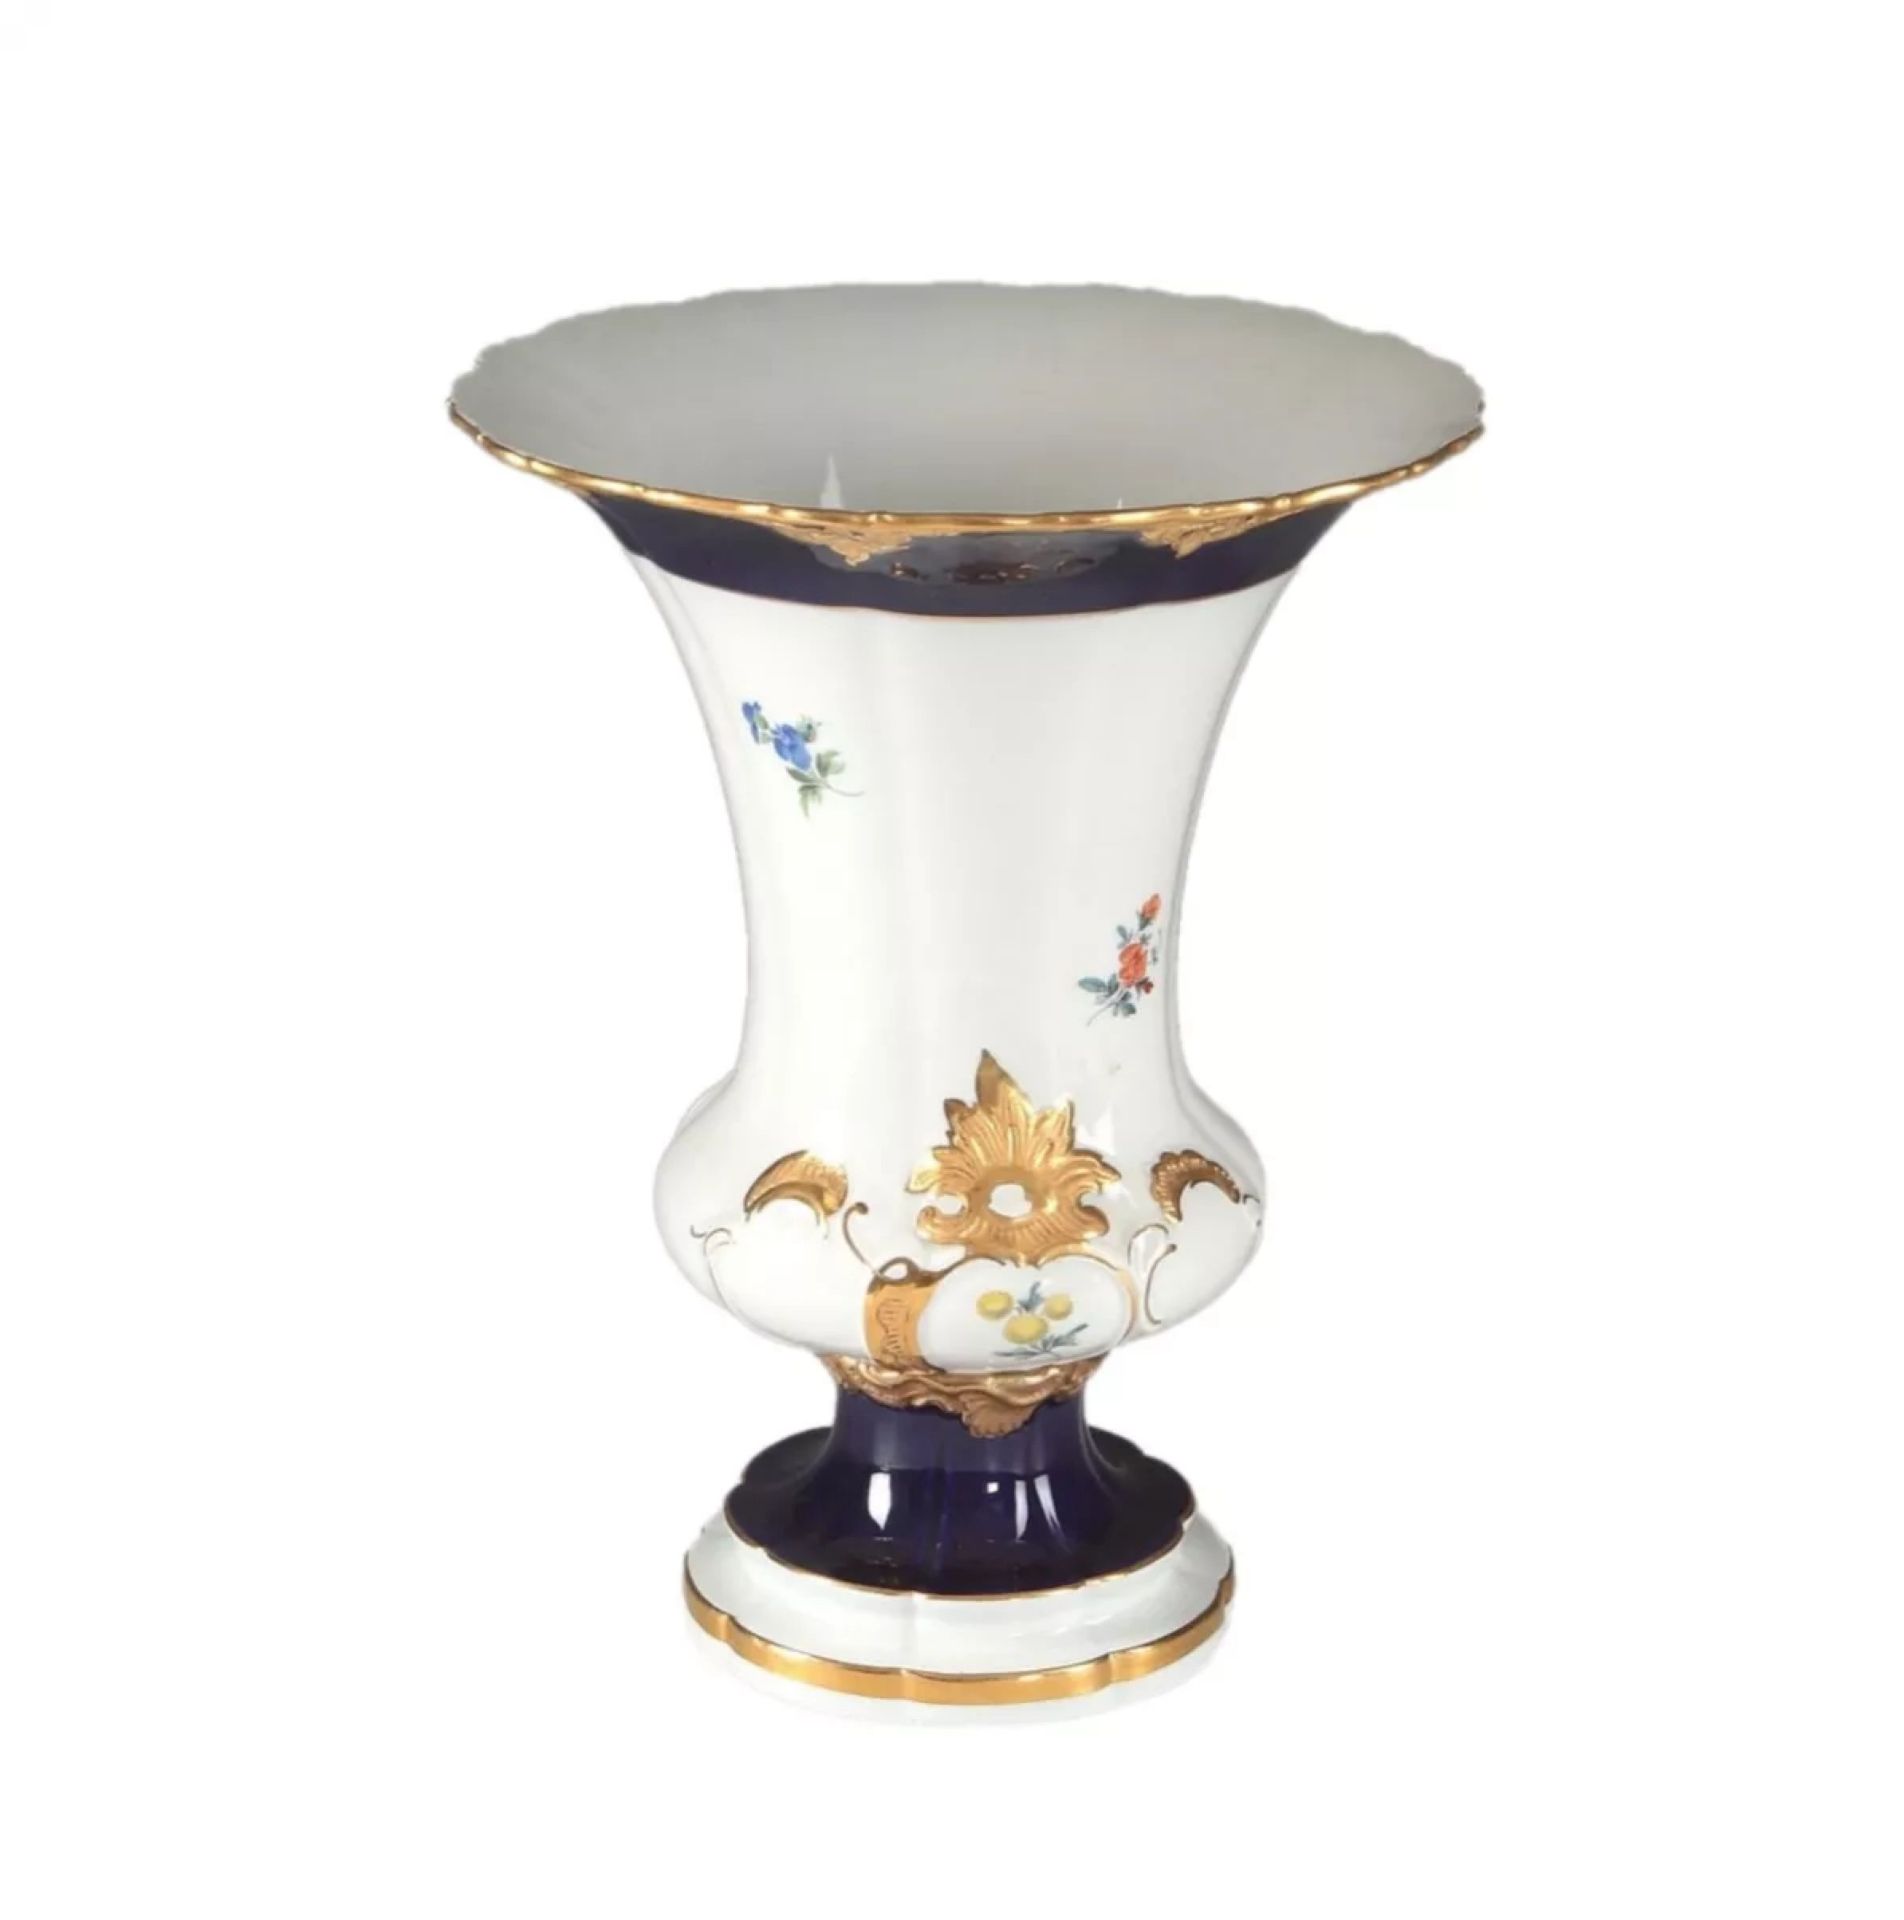 Painted Meissen vase with gold cartouches and cobalt. - Image 2 of 3